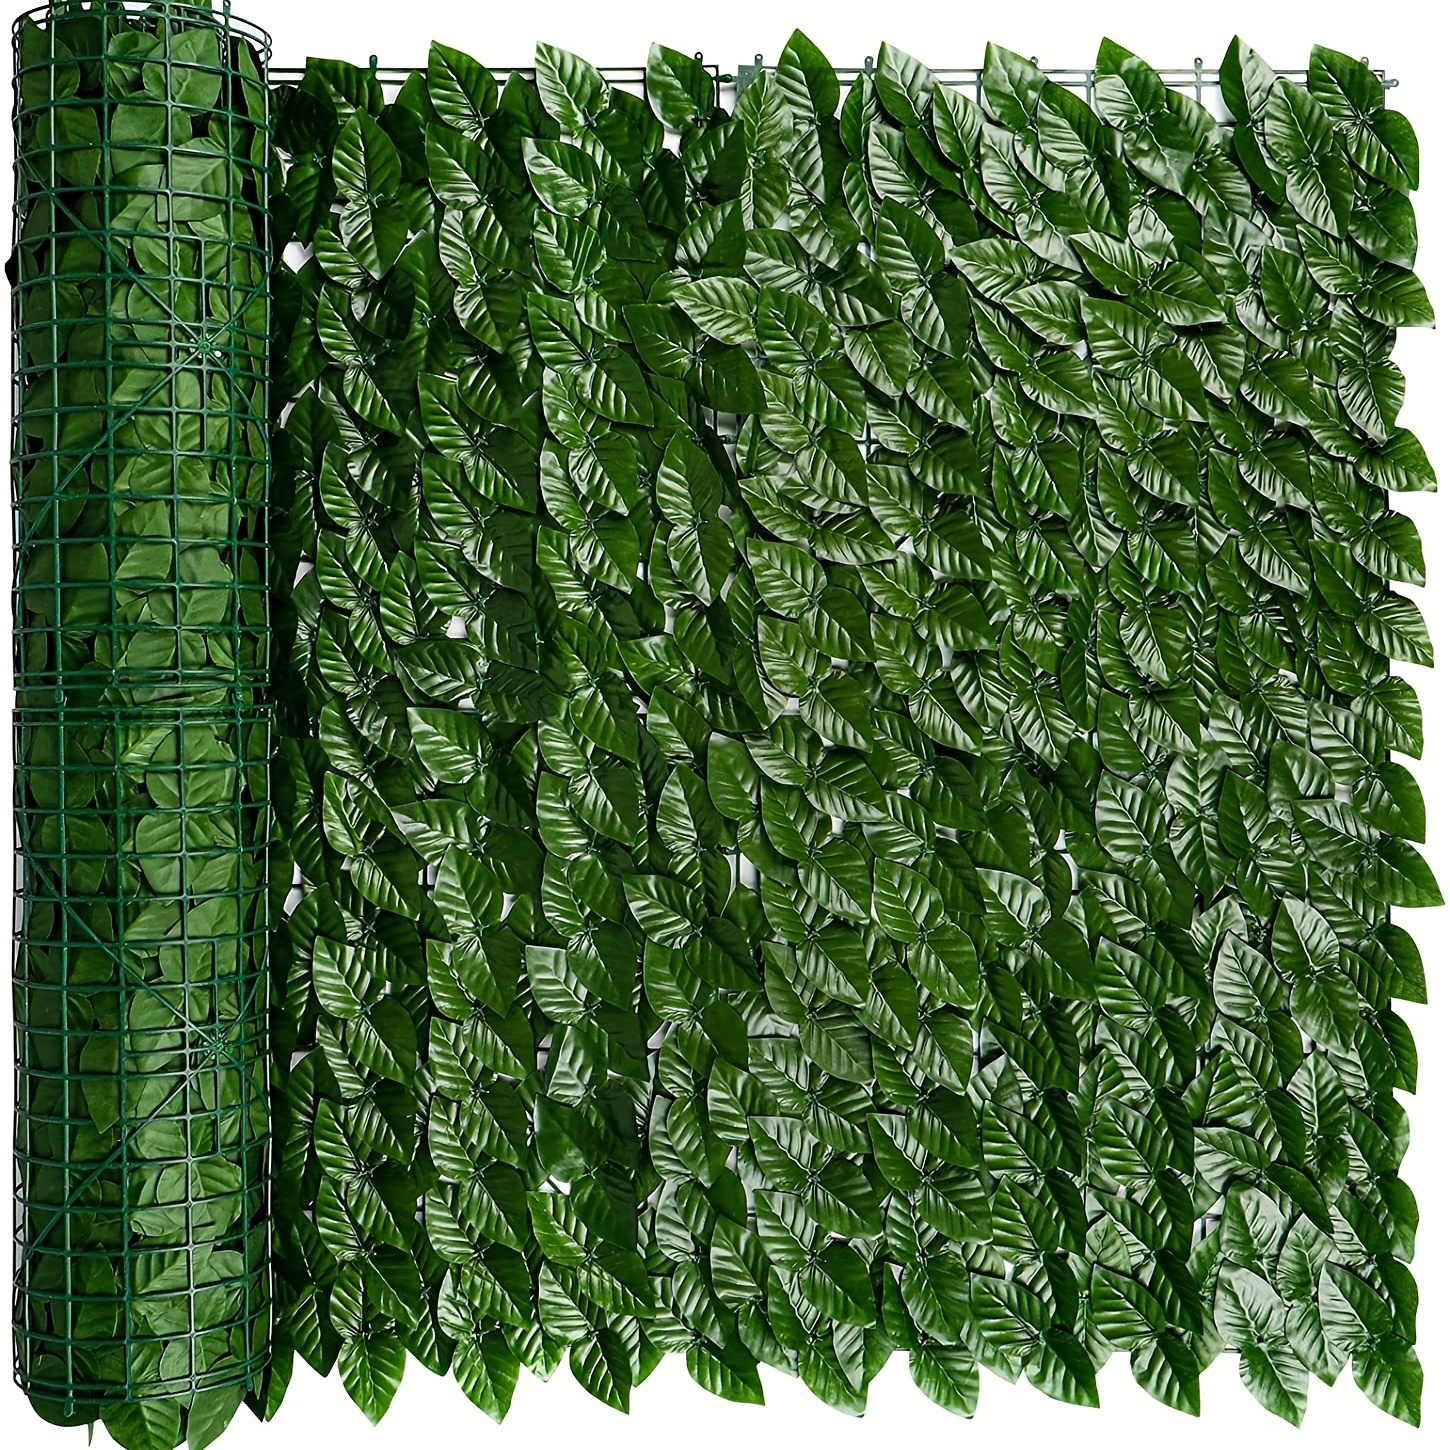 

1pc Artificial Ivy Faux Hedge Privacy Screen Fence - Uv Protected Outdoor Garden Wall Decor - Plastic Green Leaf Vine Balcony Fencing